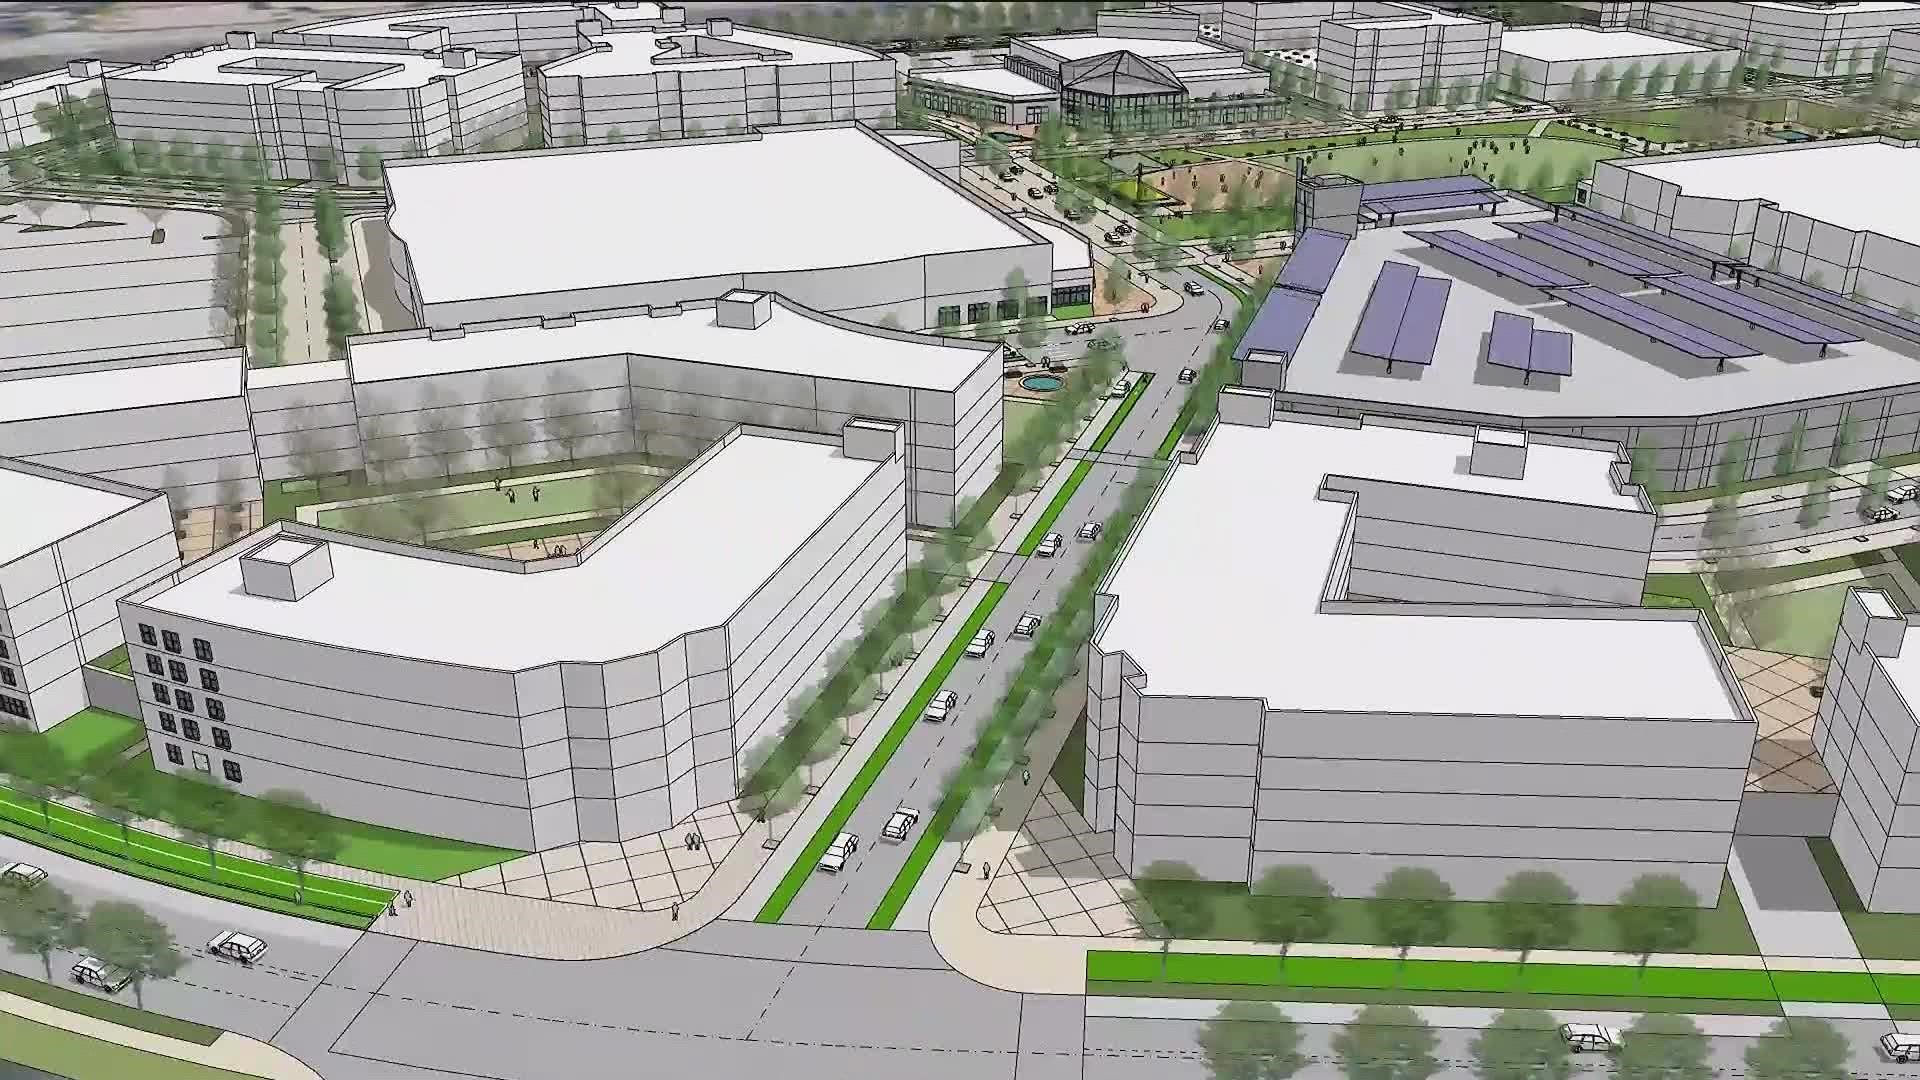 We're getting a look at what the mall could look like once it's redeveloped.